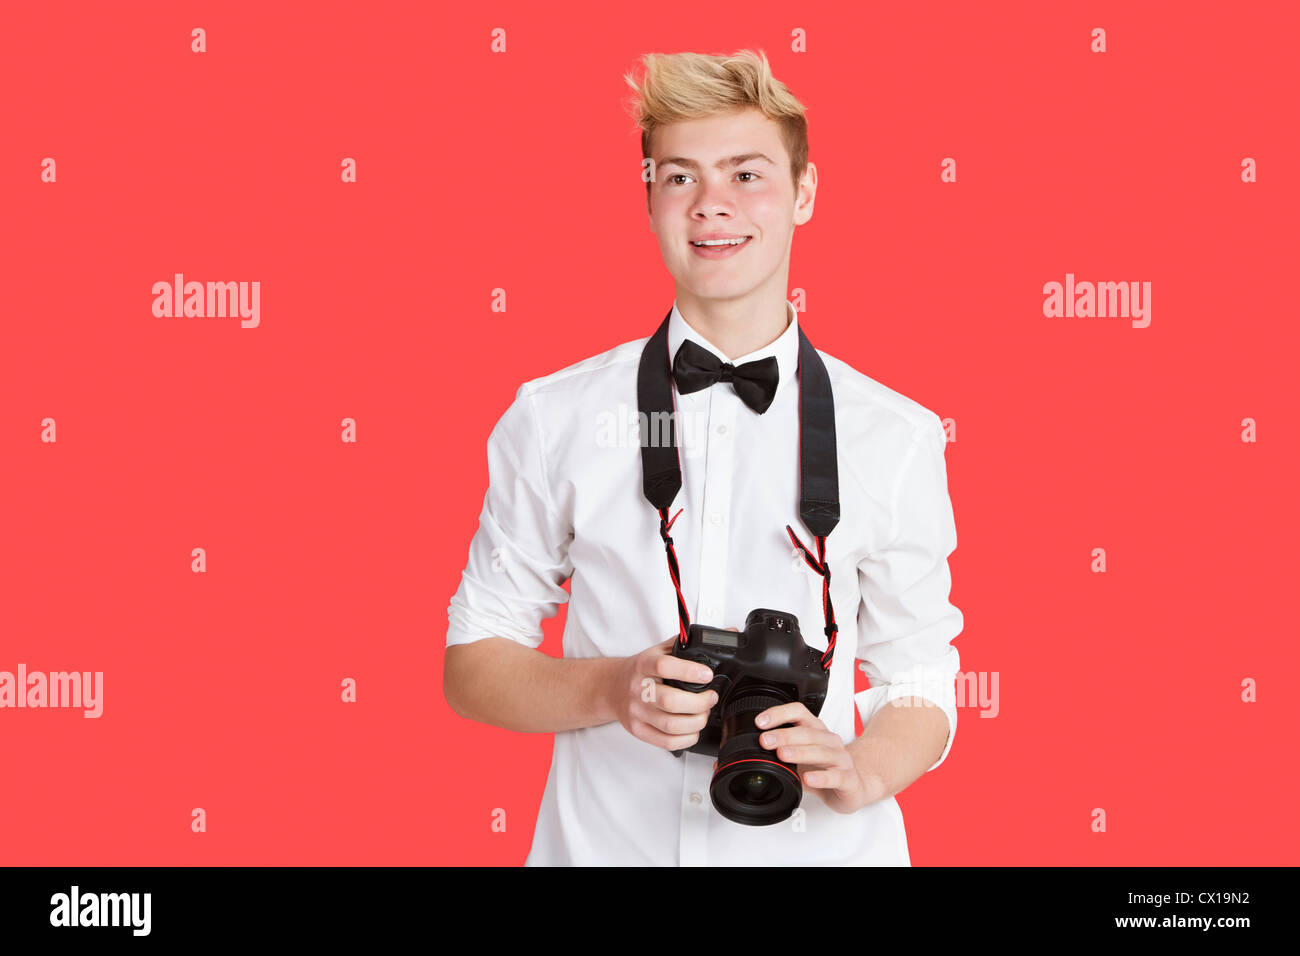 Handsome young man with digital camera over red background Stock Photo